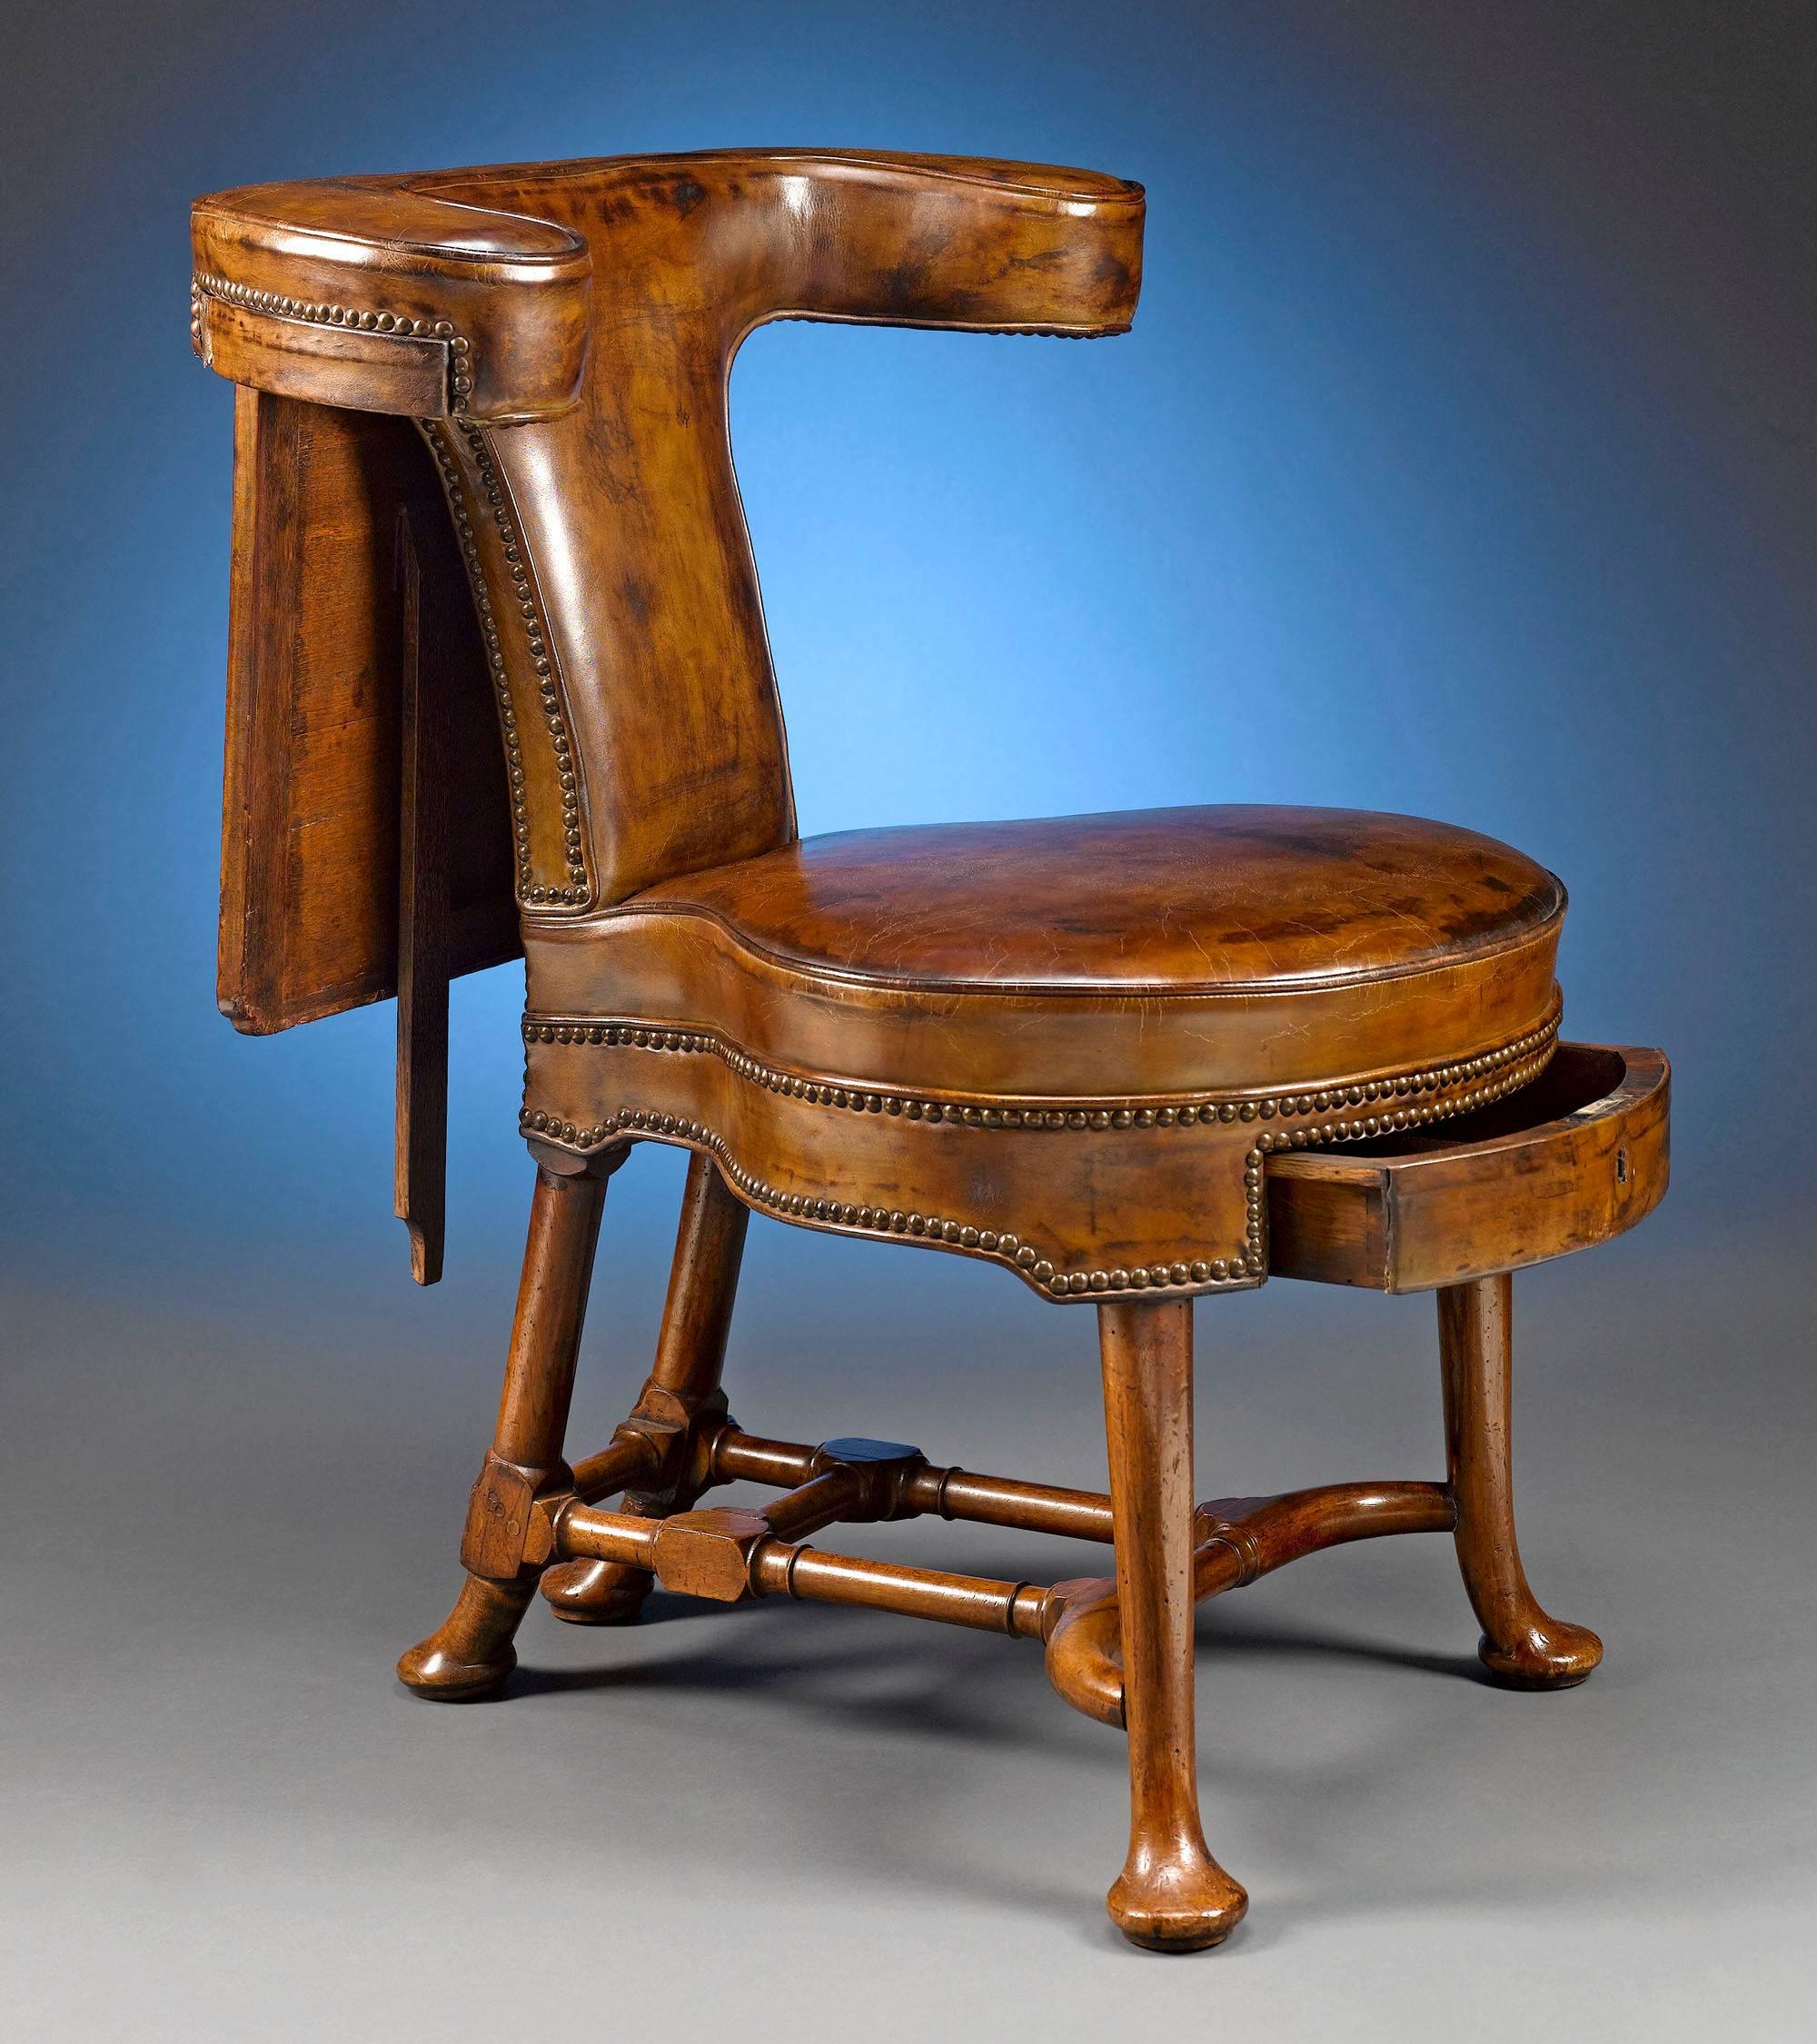 This splendid George II-period reading chair is stunning in both form and quality. Crafted of rare walnut, the marks of an early Georgian piece, this intriguing leather-upholstered seat features a yoke-shaped top rail with an adjustable easel and a